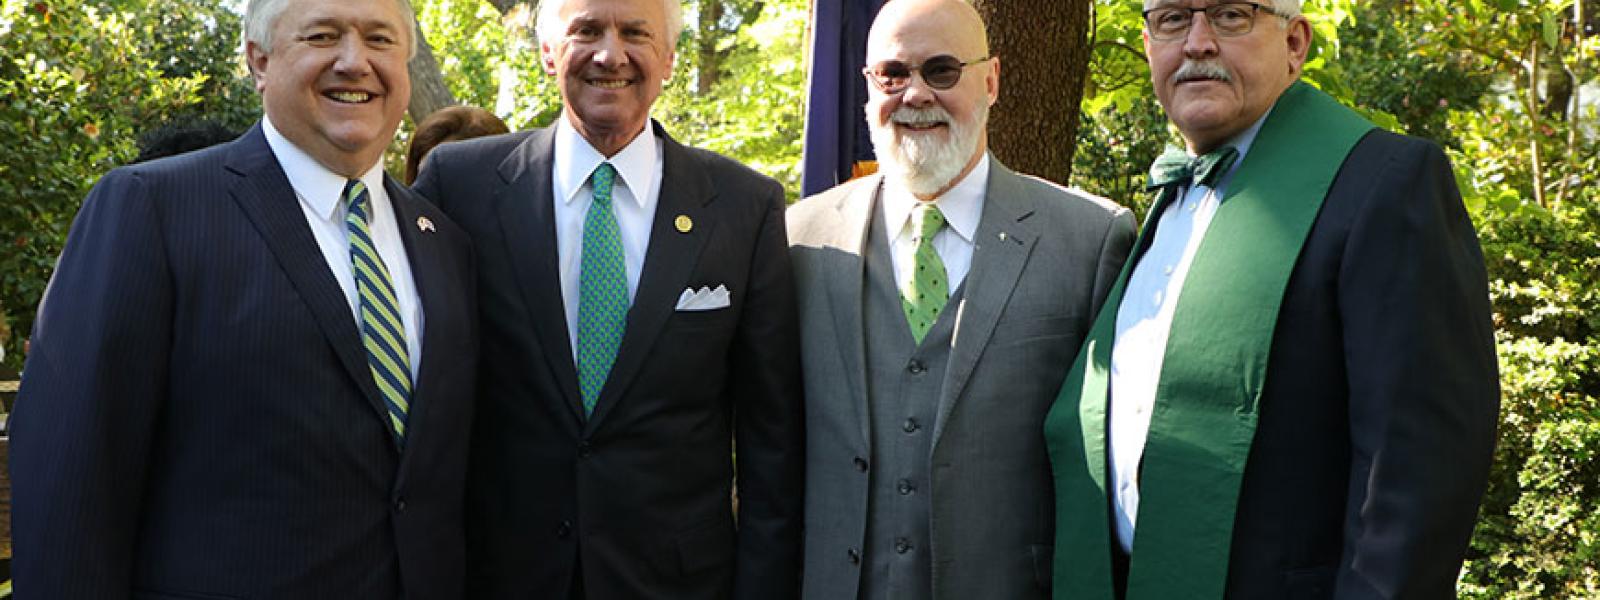 Earth Day at the Governor's Mansion: CIU President Dr. Mark Smith, Gov. Henry McMaster, CIU doctoral student Tom Mullikin, CIU Chaplaincy Professor Dr. Mike Langston 